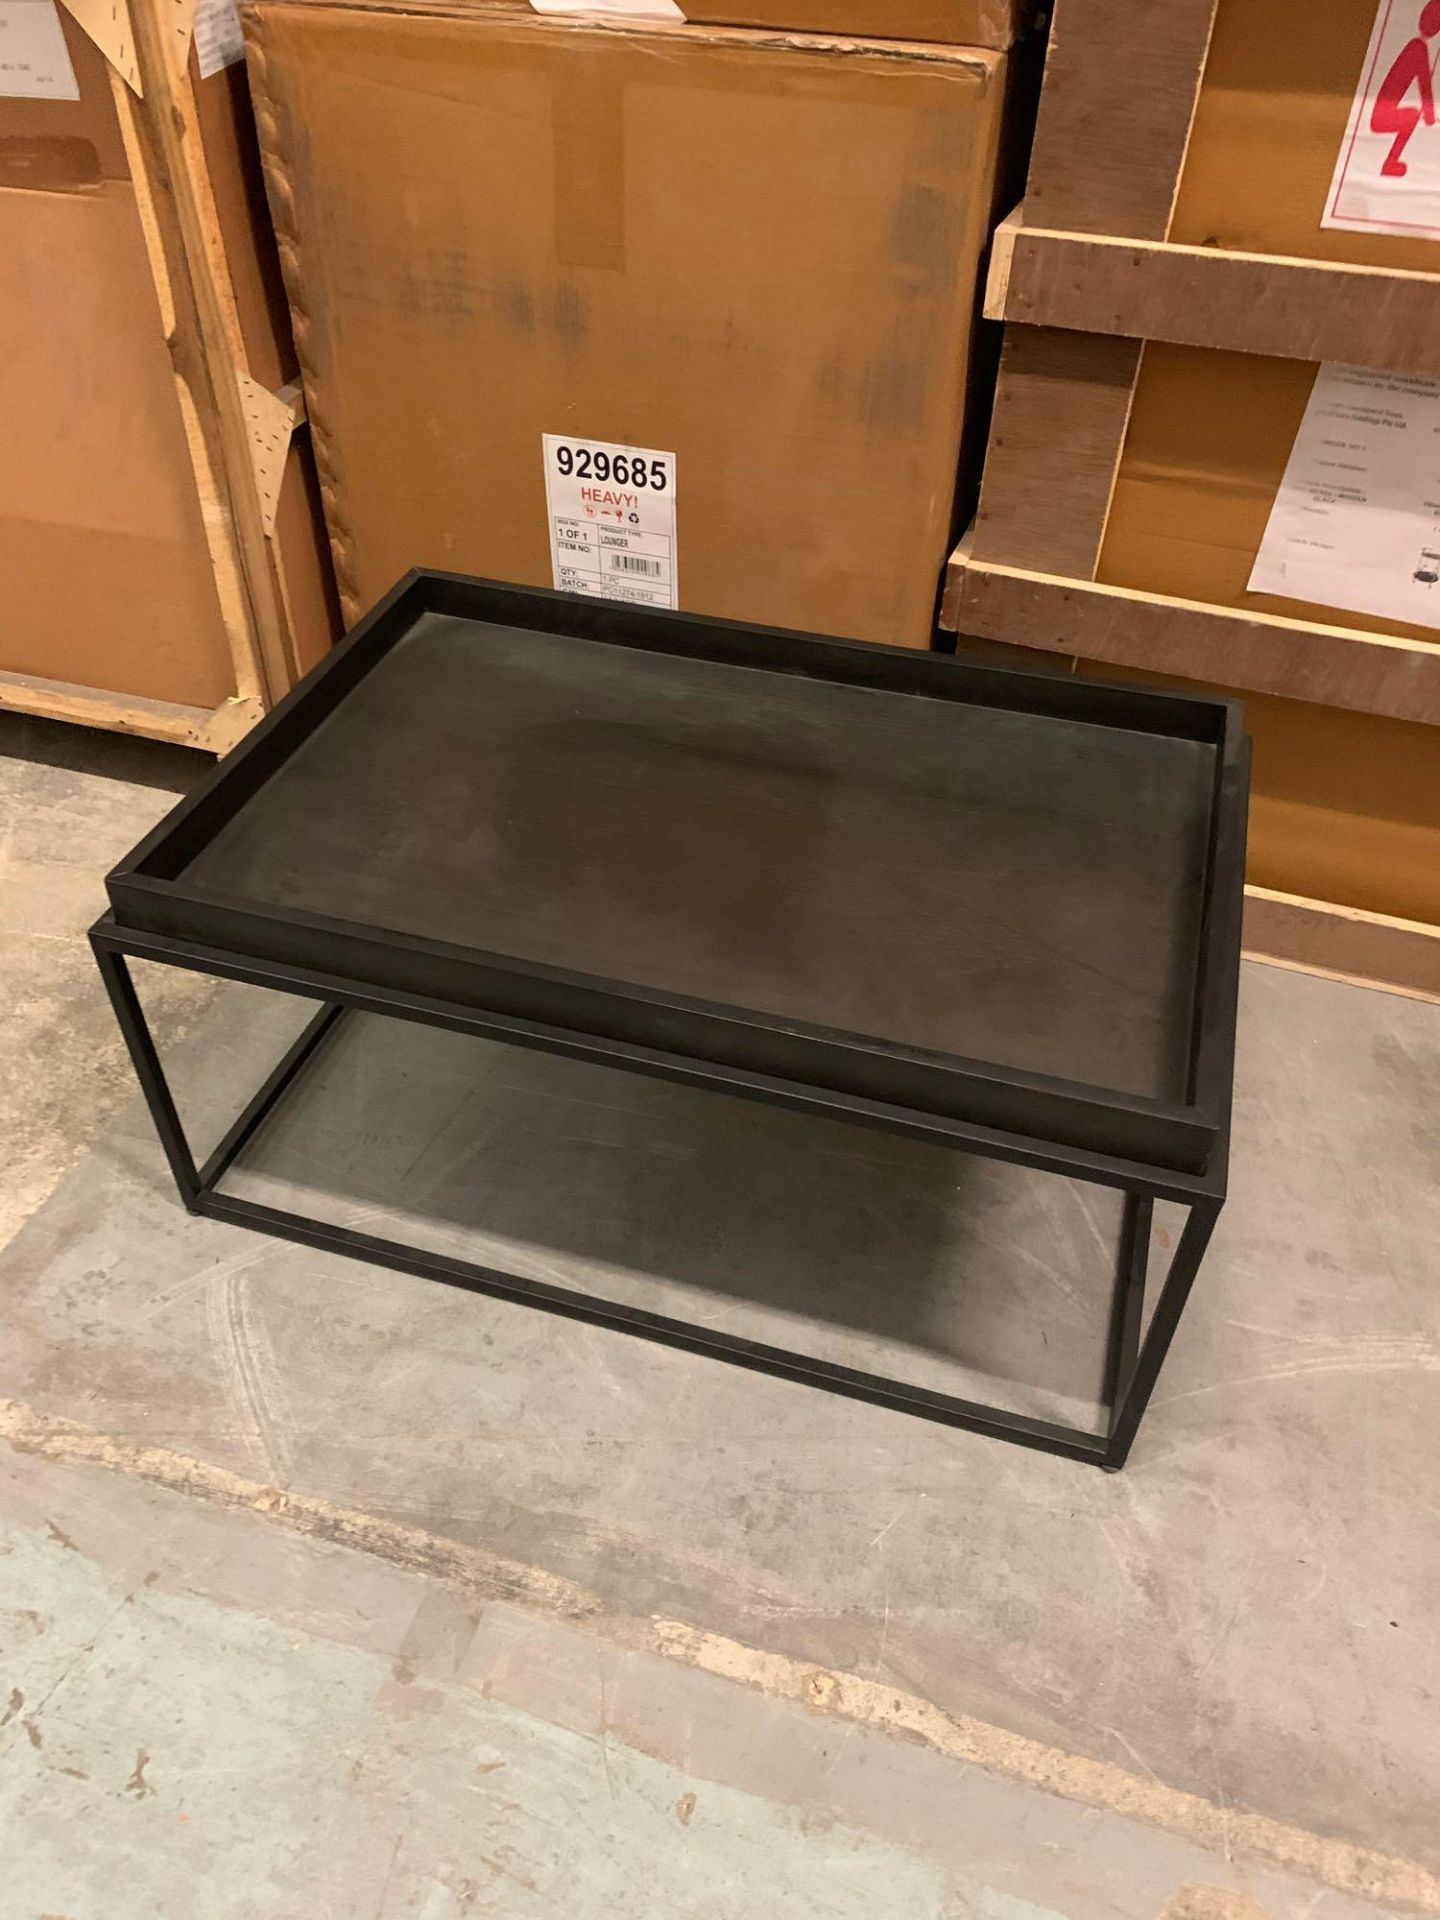 Forden Tray Coffee Table Black W900 x D600 x H400mm The Forden Black Side Table Completed With A - Bild 2 aus 5